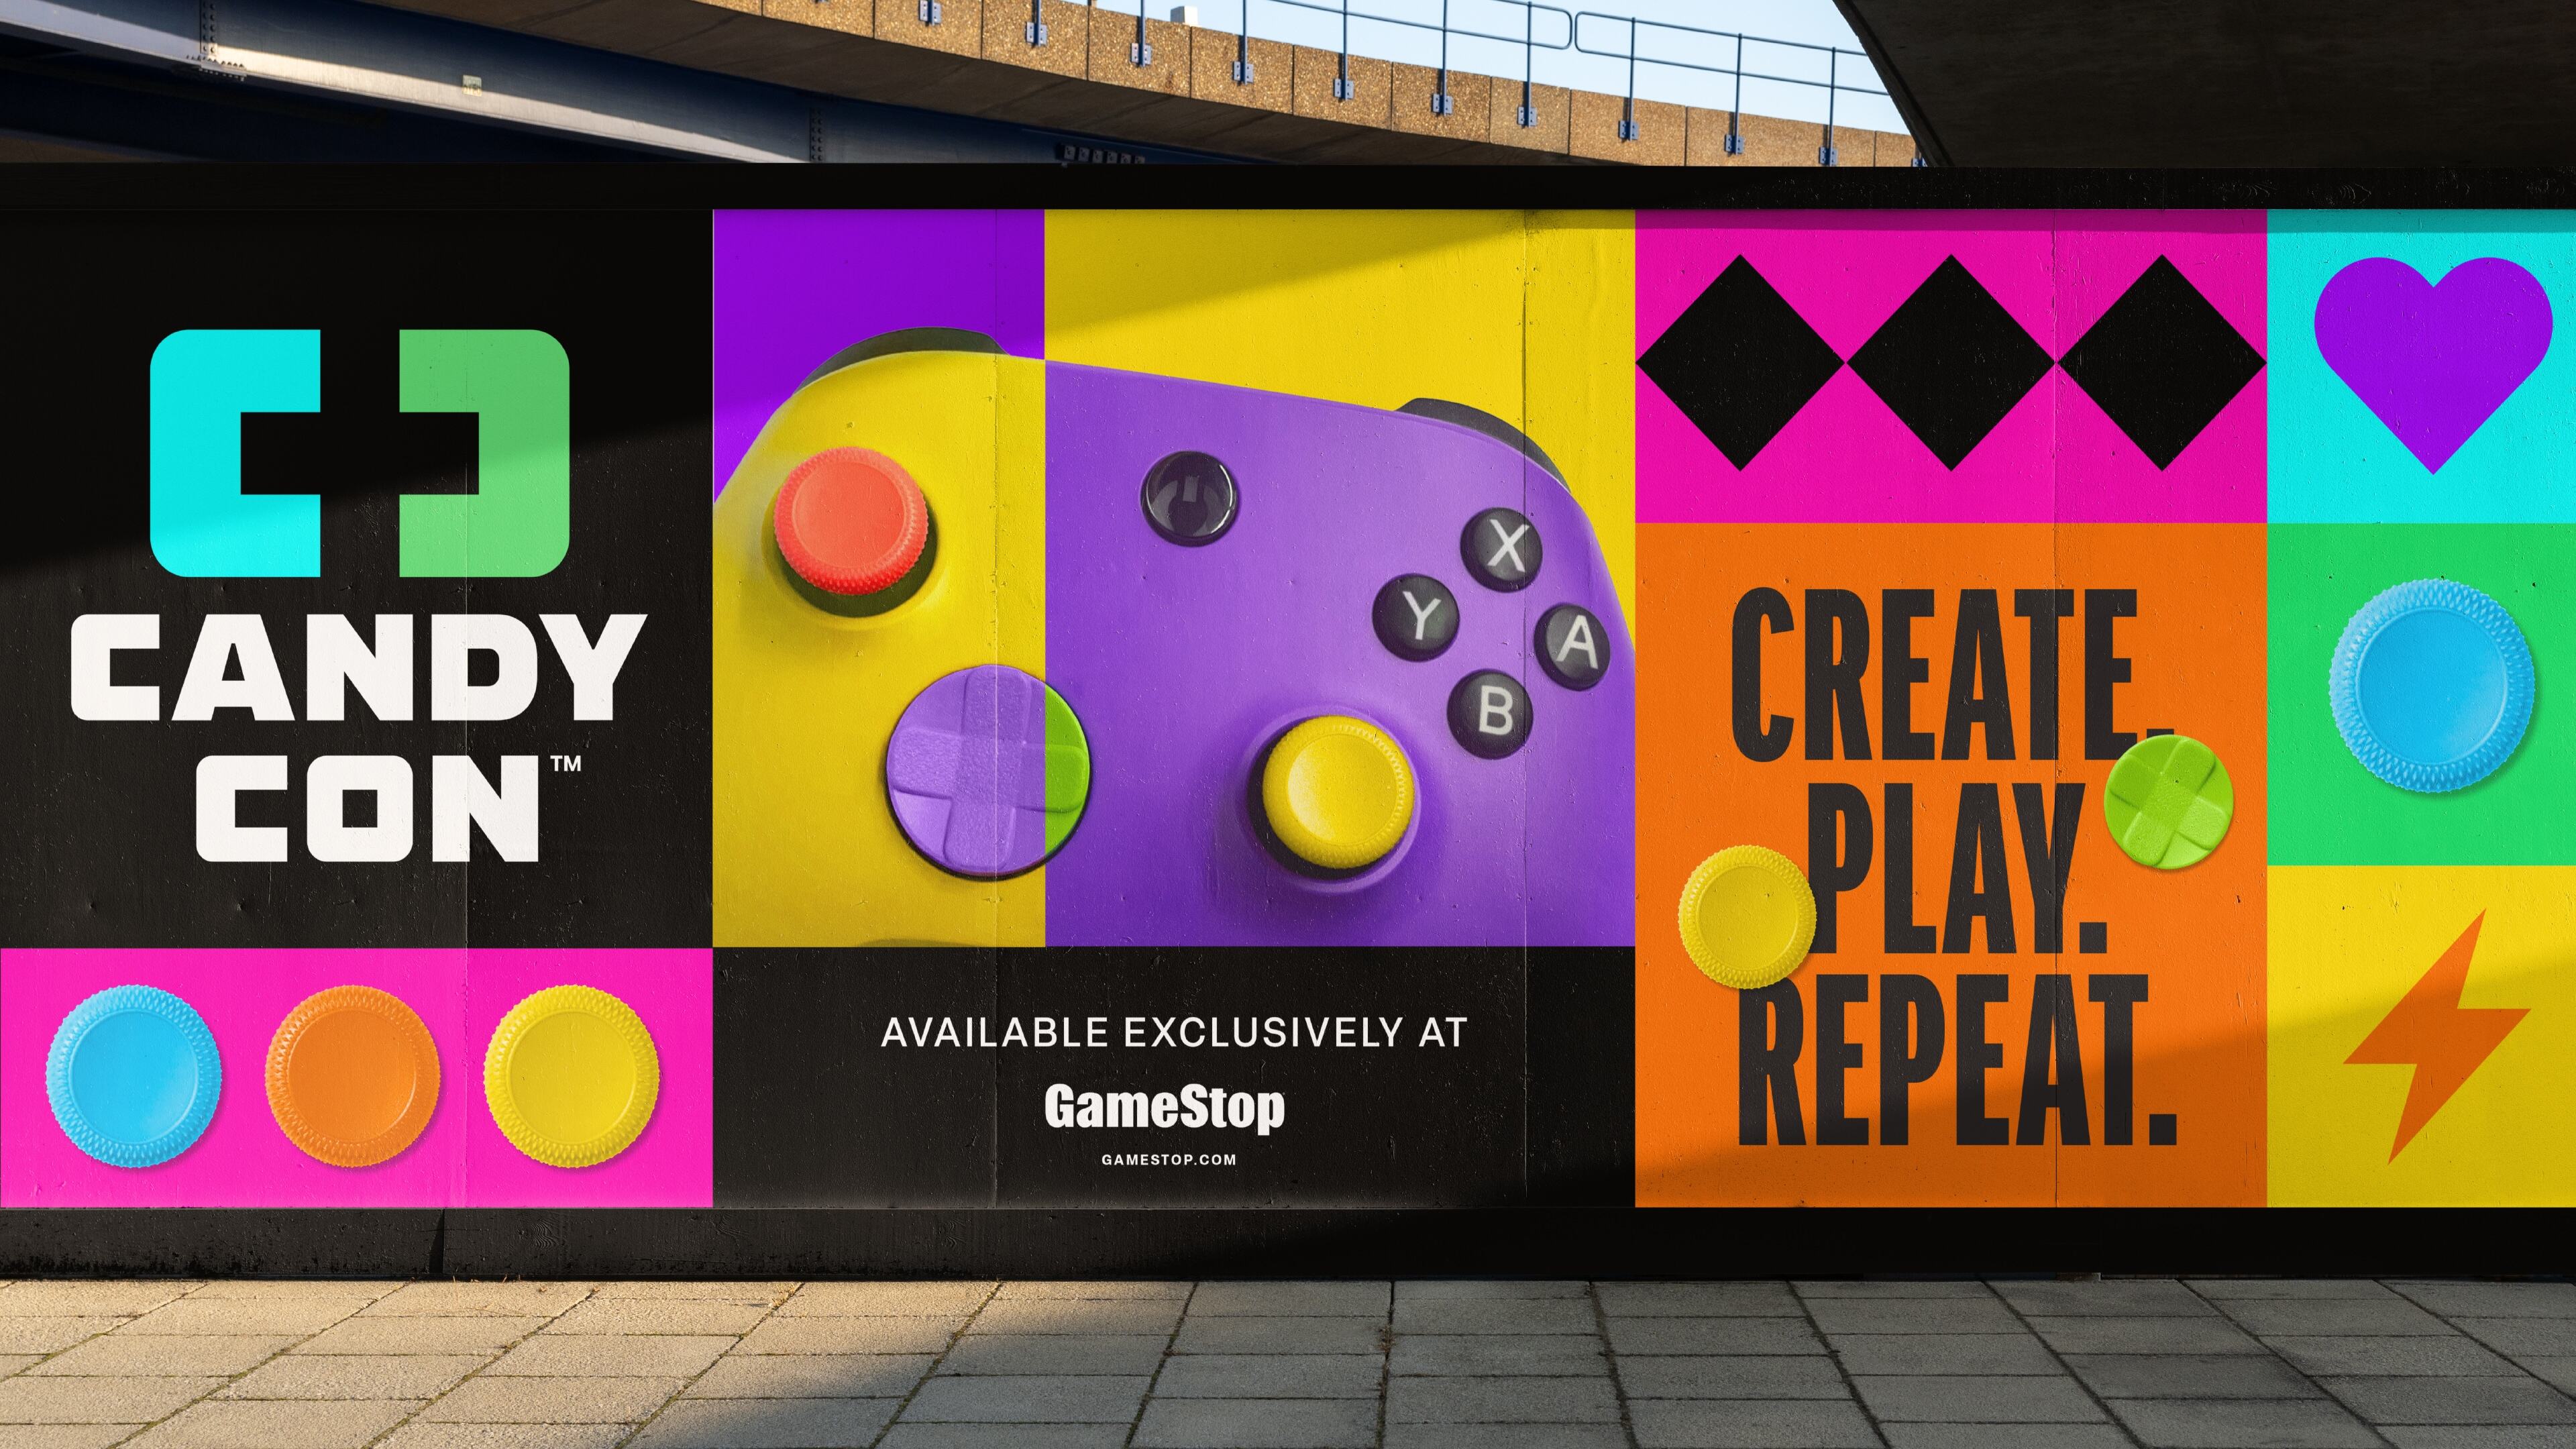 GameStop Shakes up the Gaming Scene with CANDY CON Personalised Controllers